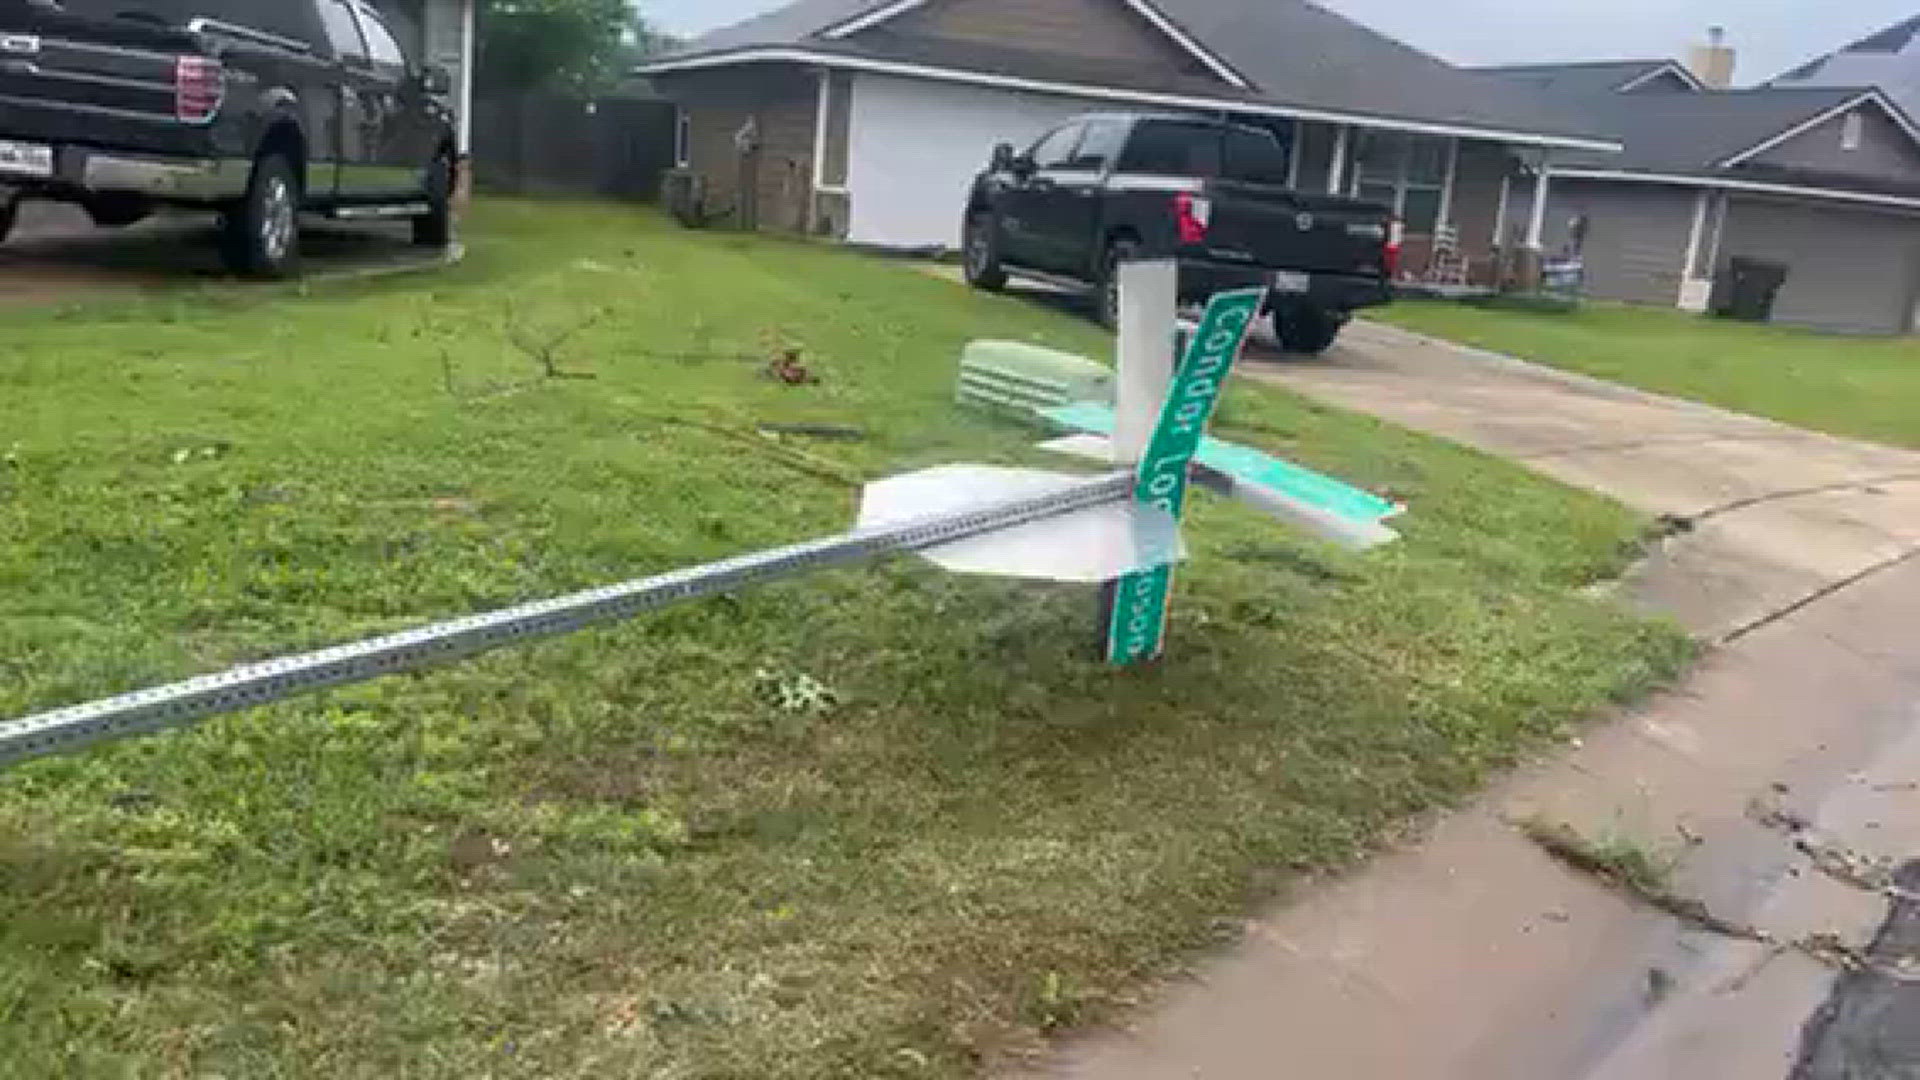 6 News Reporter Sydney Dishon captures video of a fallen stop sign and other damage in China Spring, Texas
Credit: Sydney dishon